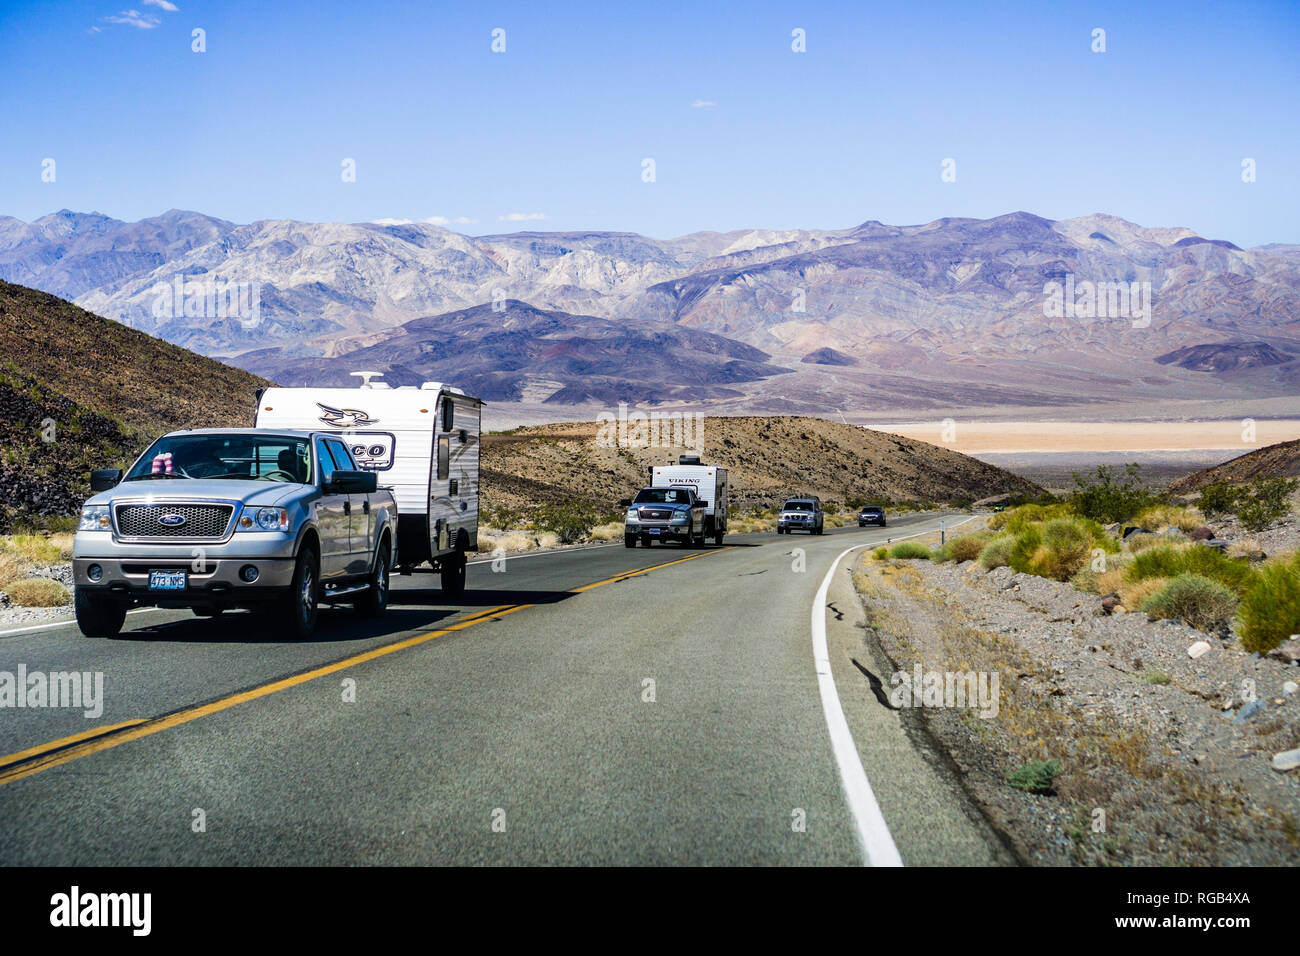 May 28, 2018 Death Valley / CA / USA - Pick up trucks with RV travel trailers driving though Death Valley National Park; Panamint Valley visible in th Stock Photo